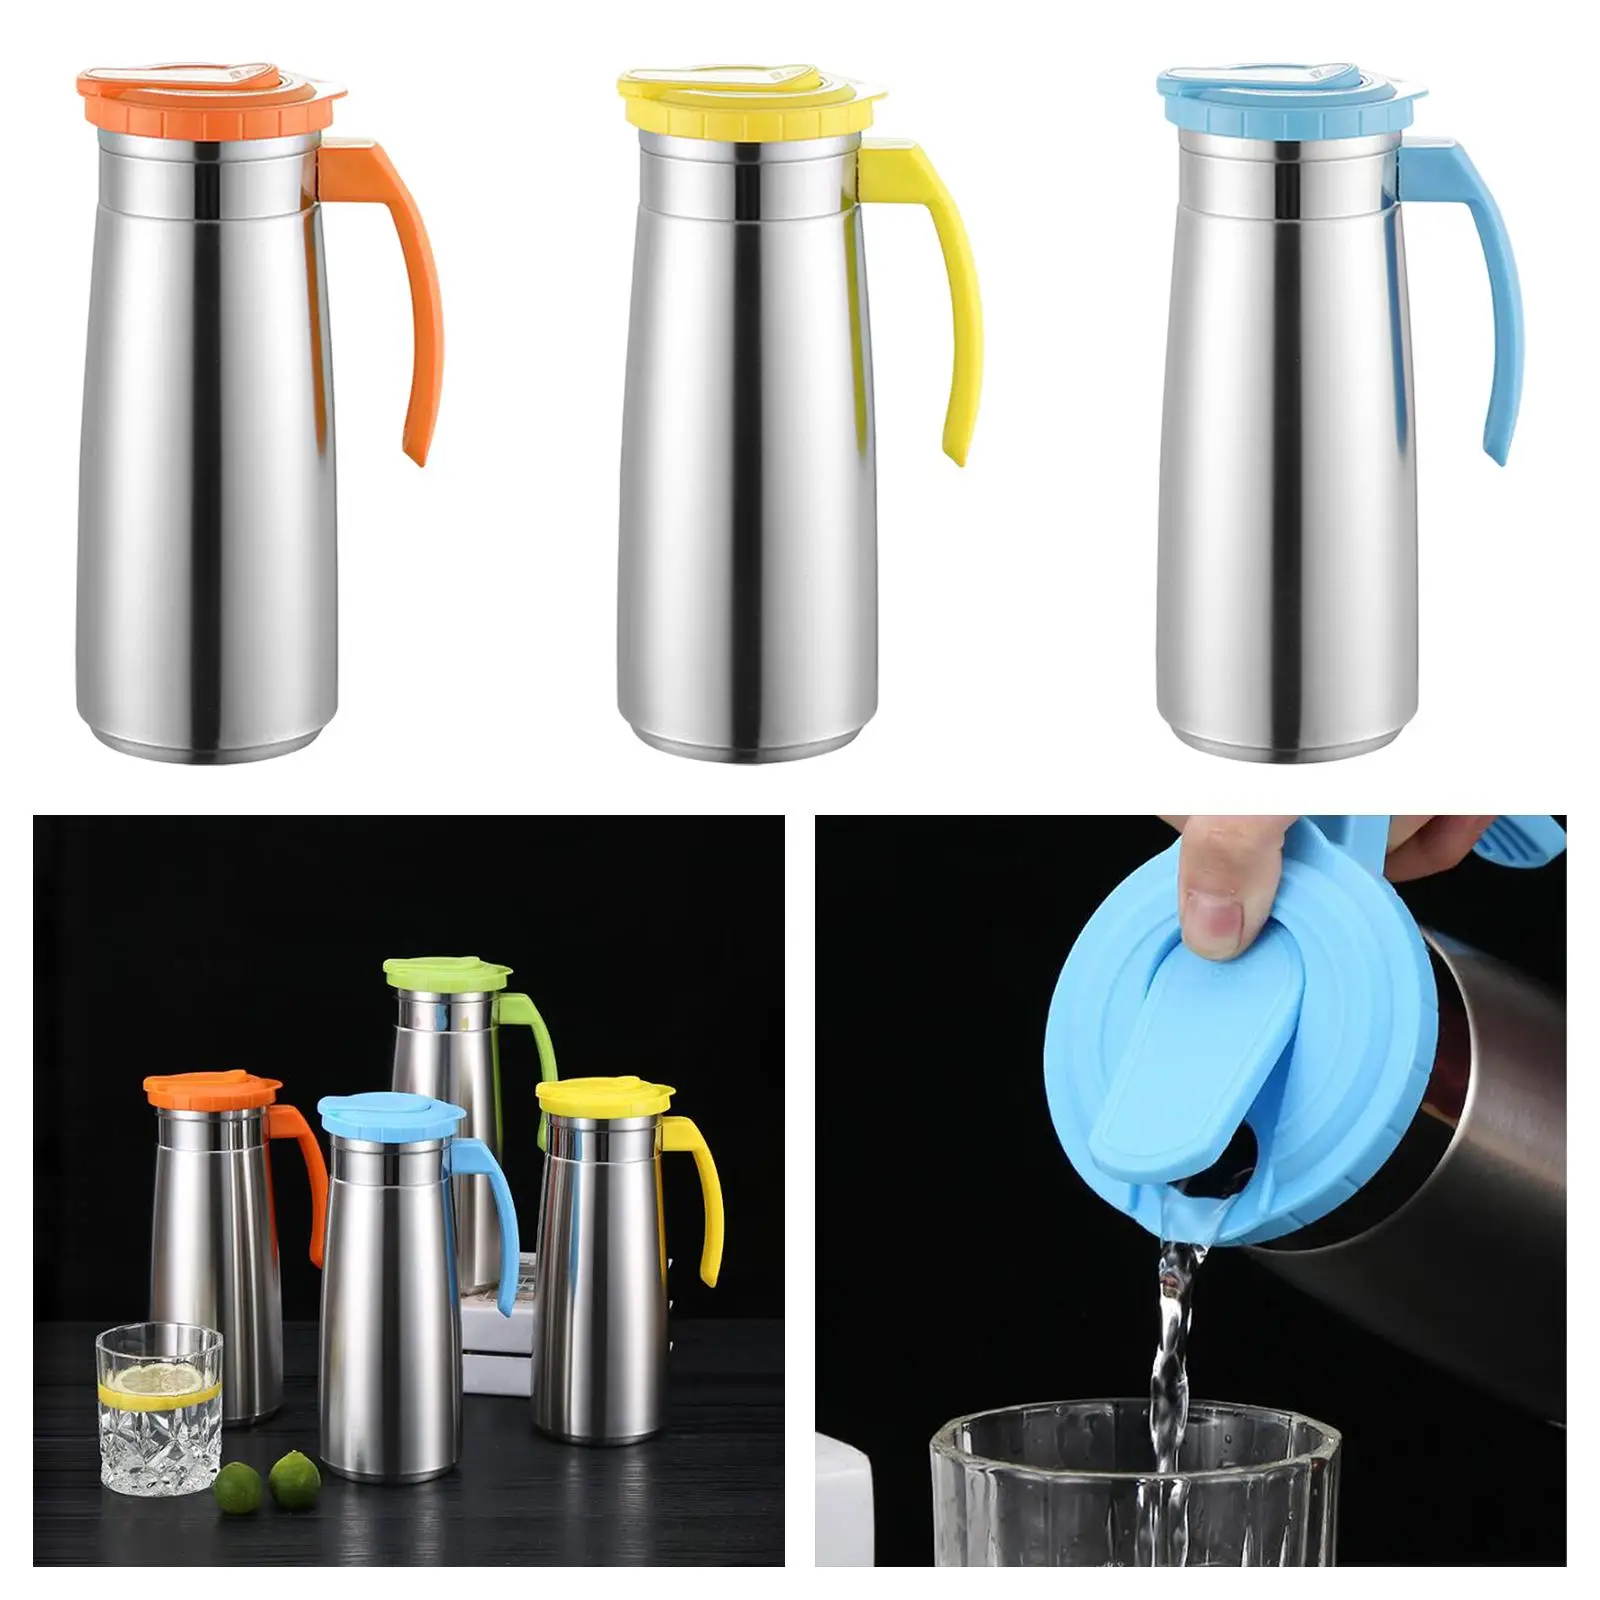 Cold Water Kettle Sealed Lid High Temperature Resistant Drinks Water Jug Water Bottle for Holiday Home Barbecue Party Fridge